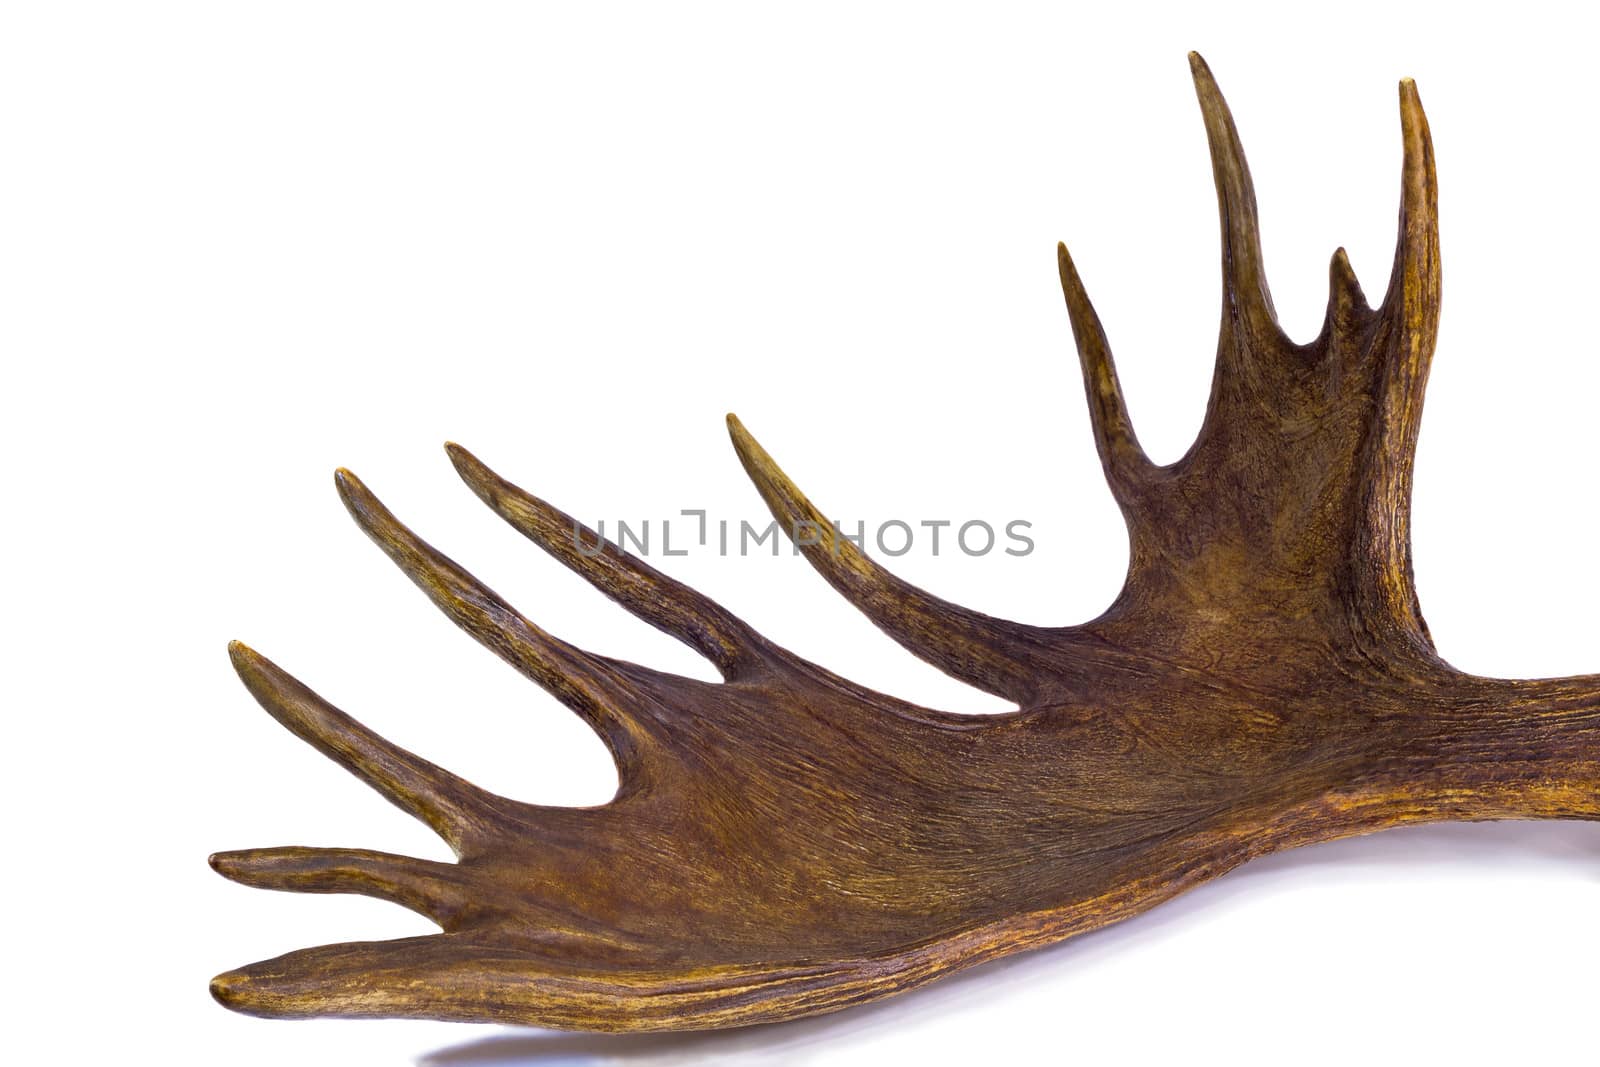 Big branchy elk horn with more branches. Presented on a white background.